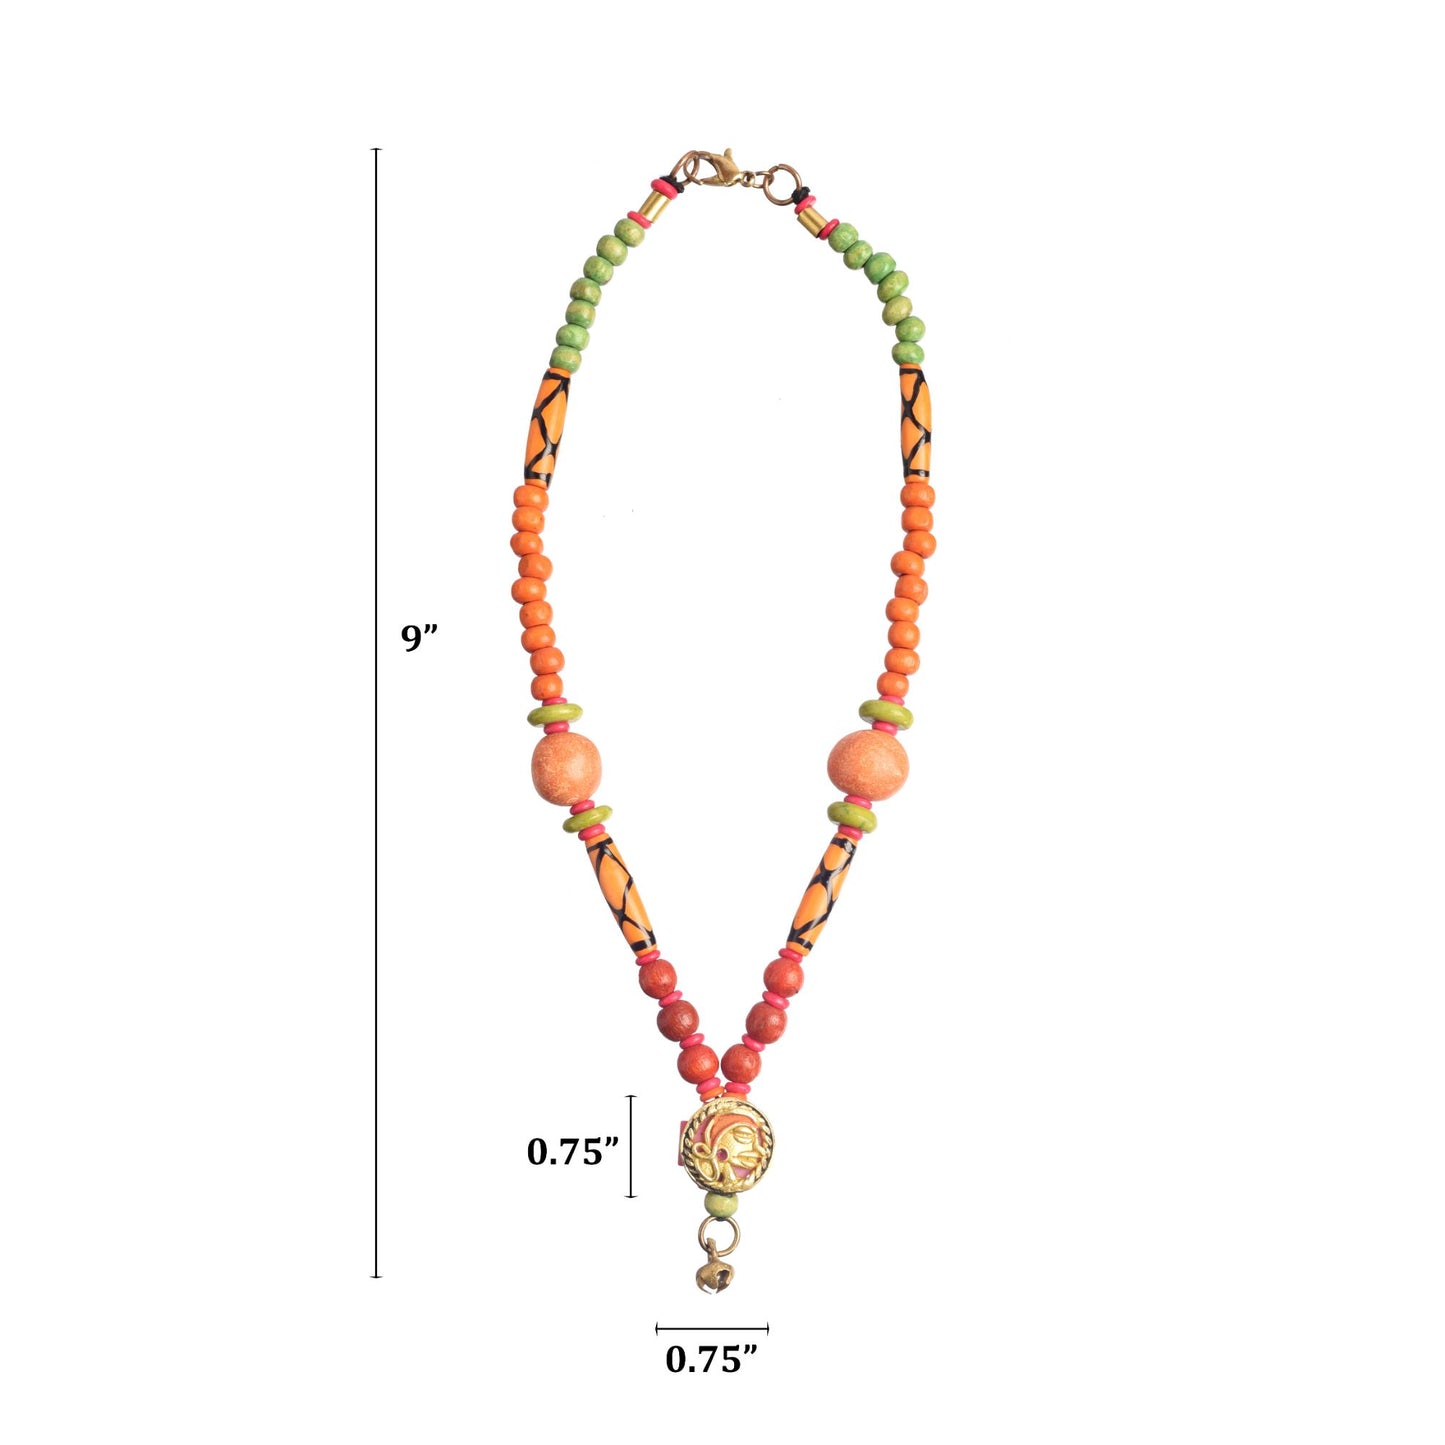 The Orange Queen Handcrafted Tribal Necklace